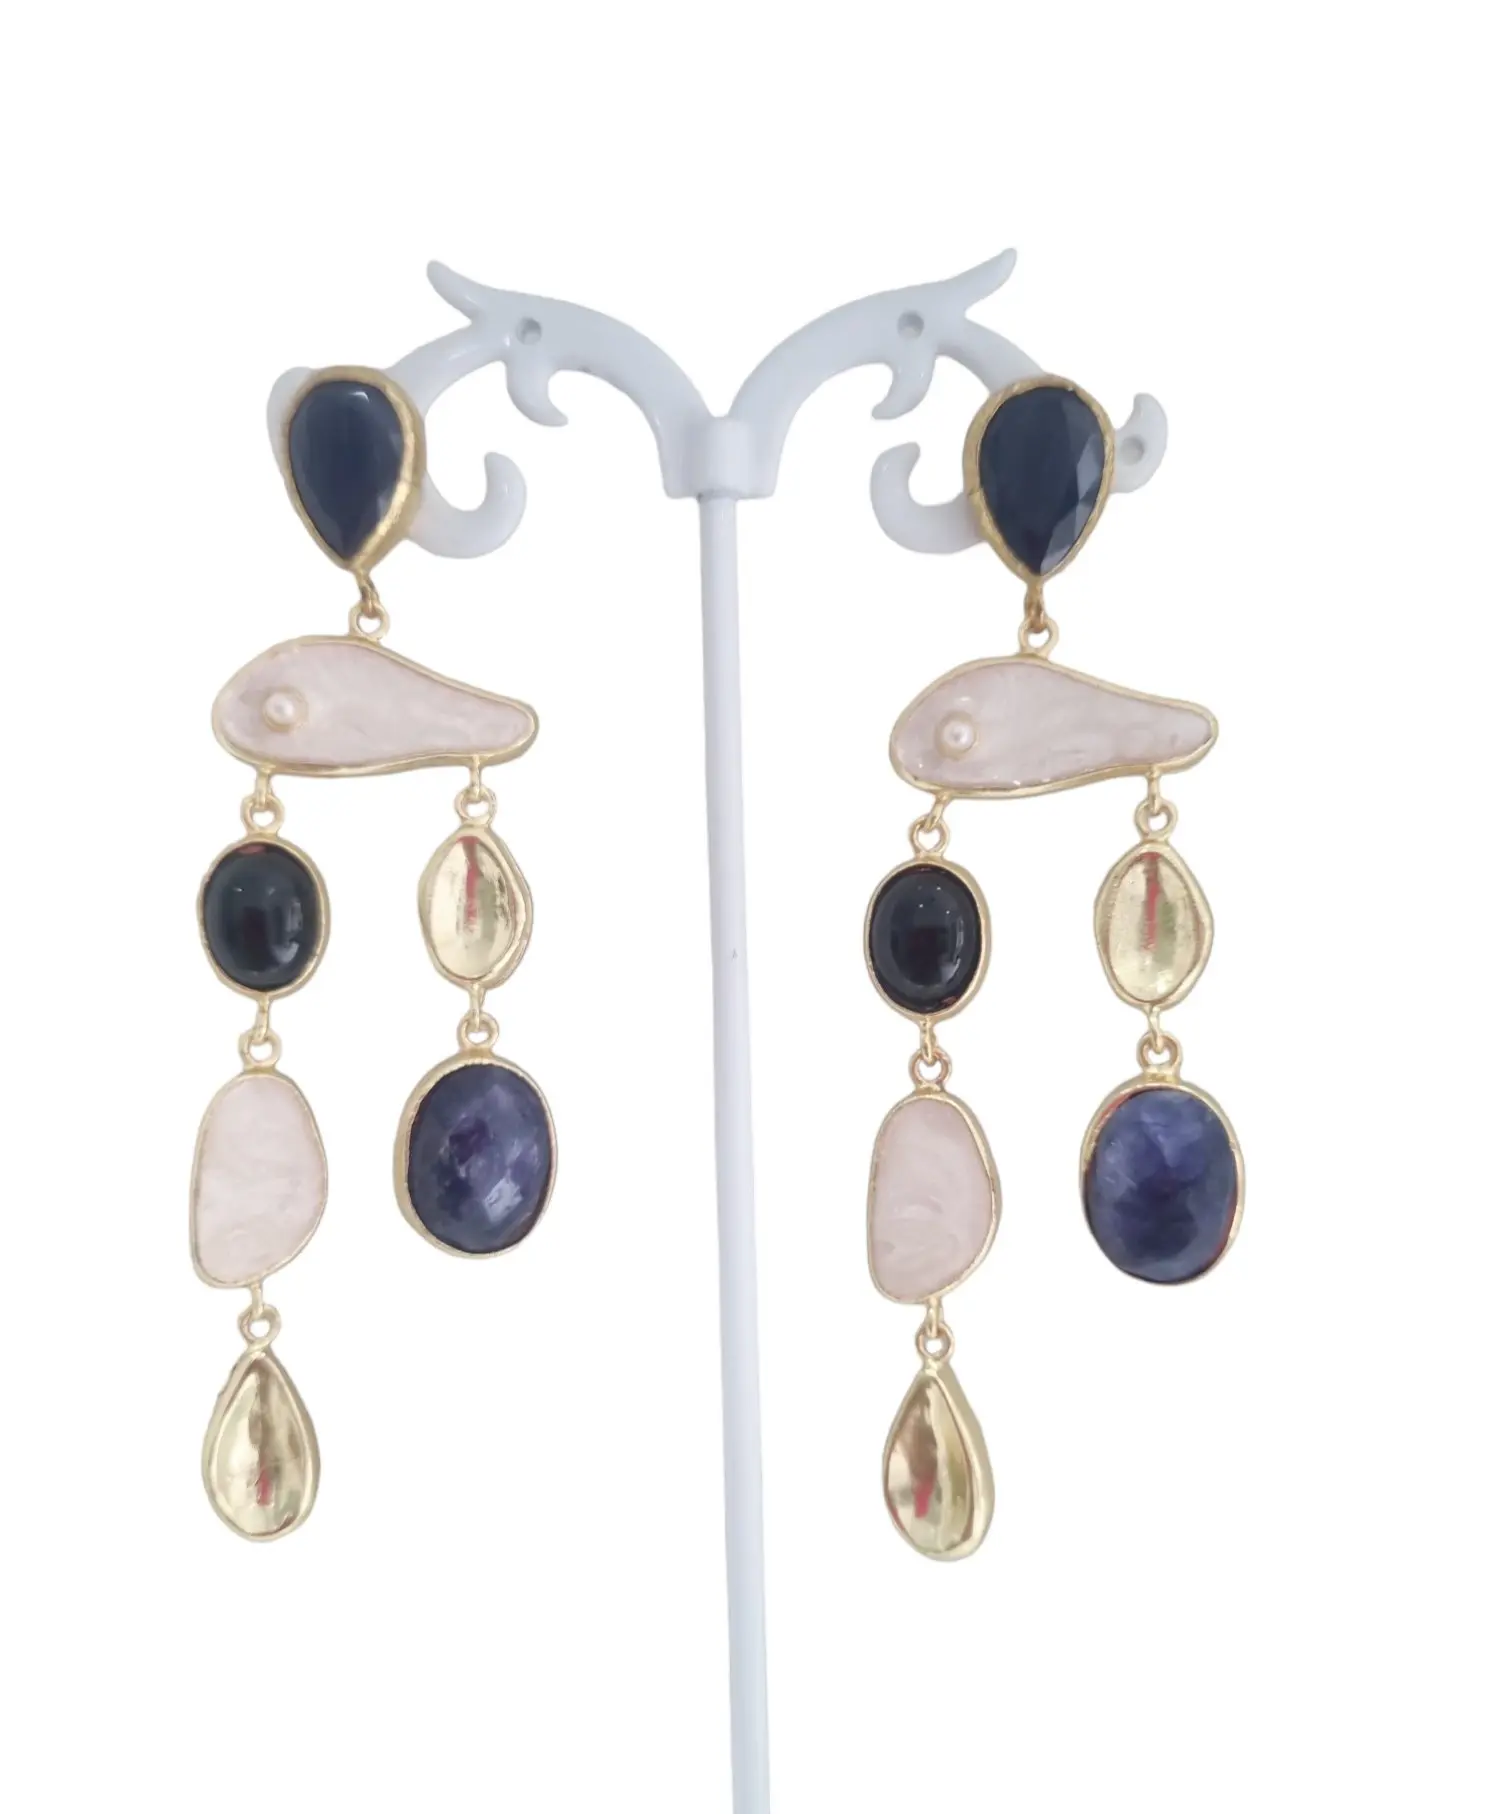 Earrings made with mother of pearl, lapis lazuli, cat's eye brass and obsidian. Weight 12.8 g Length 8.5cm